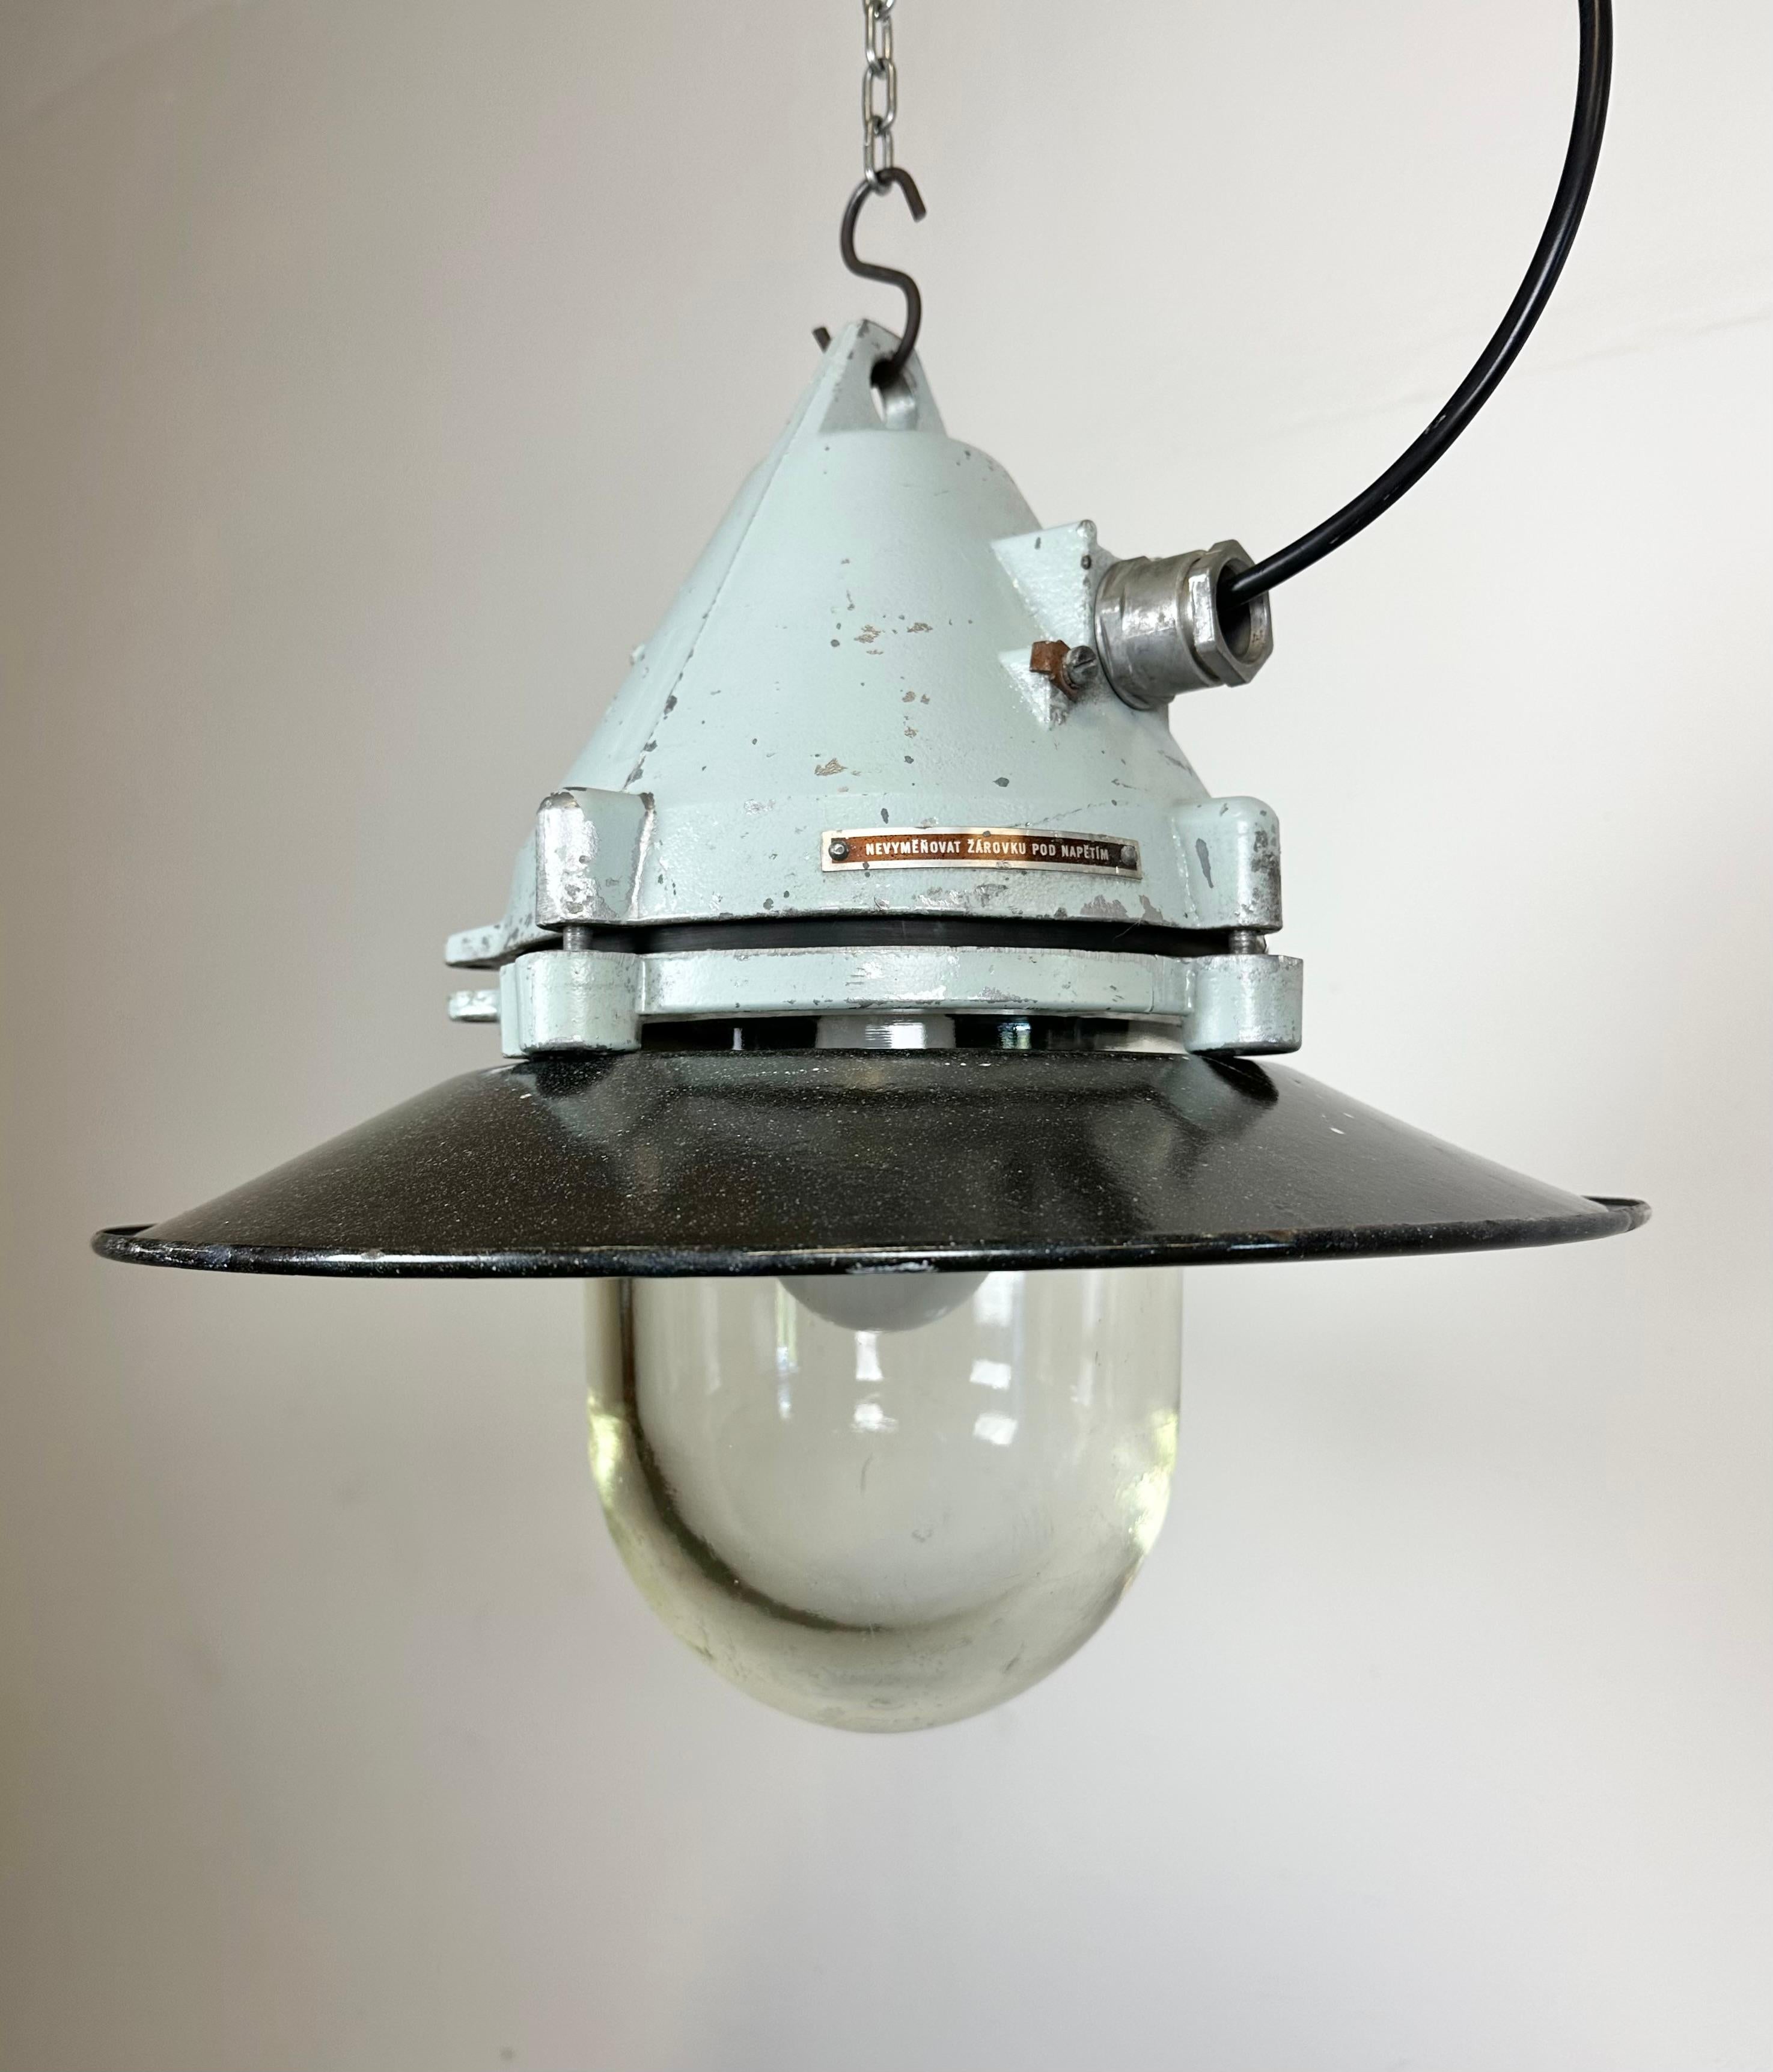 Aluminum Grey Cast Aluminium Explosion Proof Lamp with Enameled Shade, 1970s For Sale